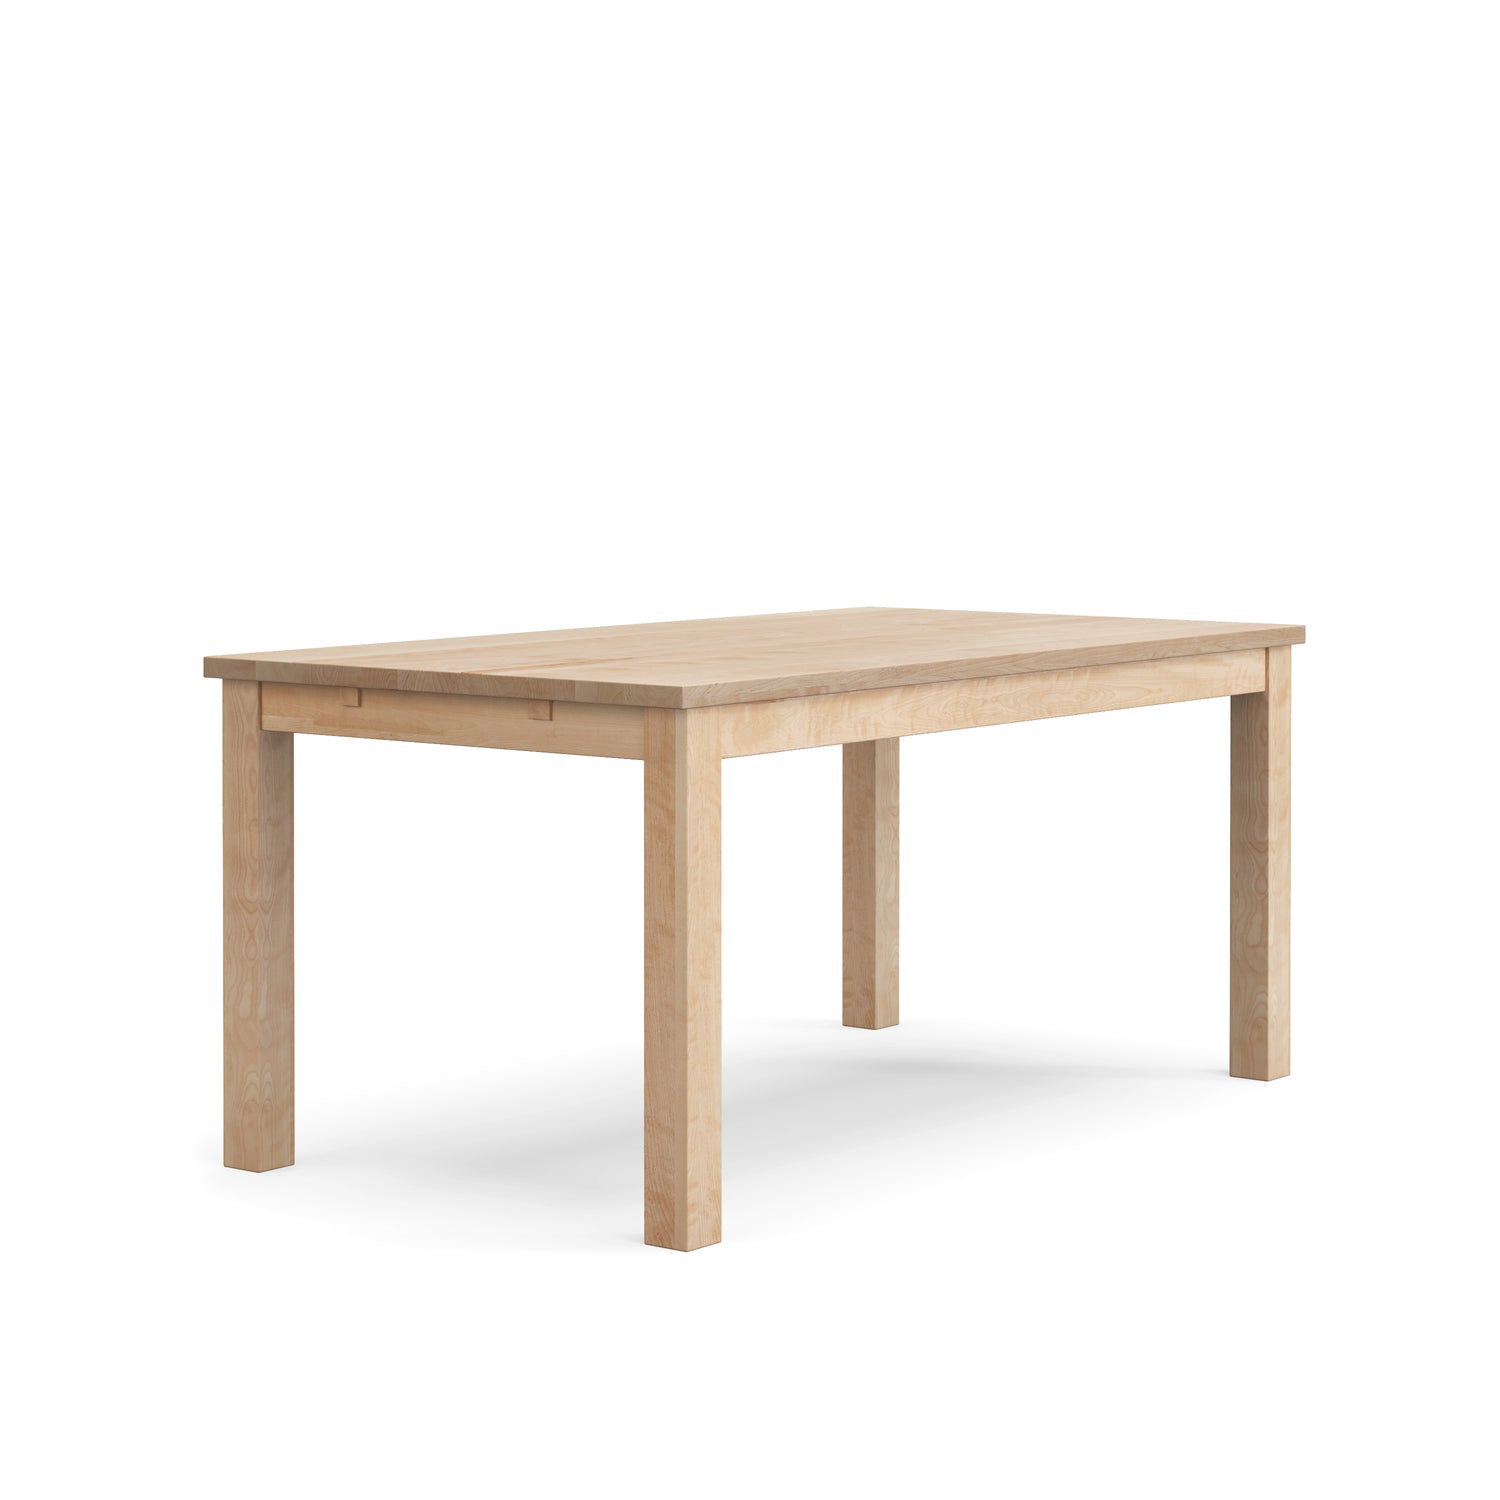 Classic solid wood dinning table